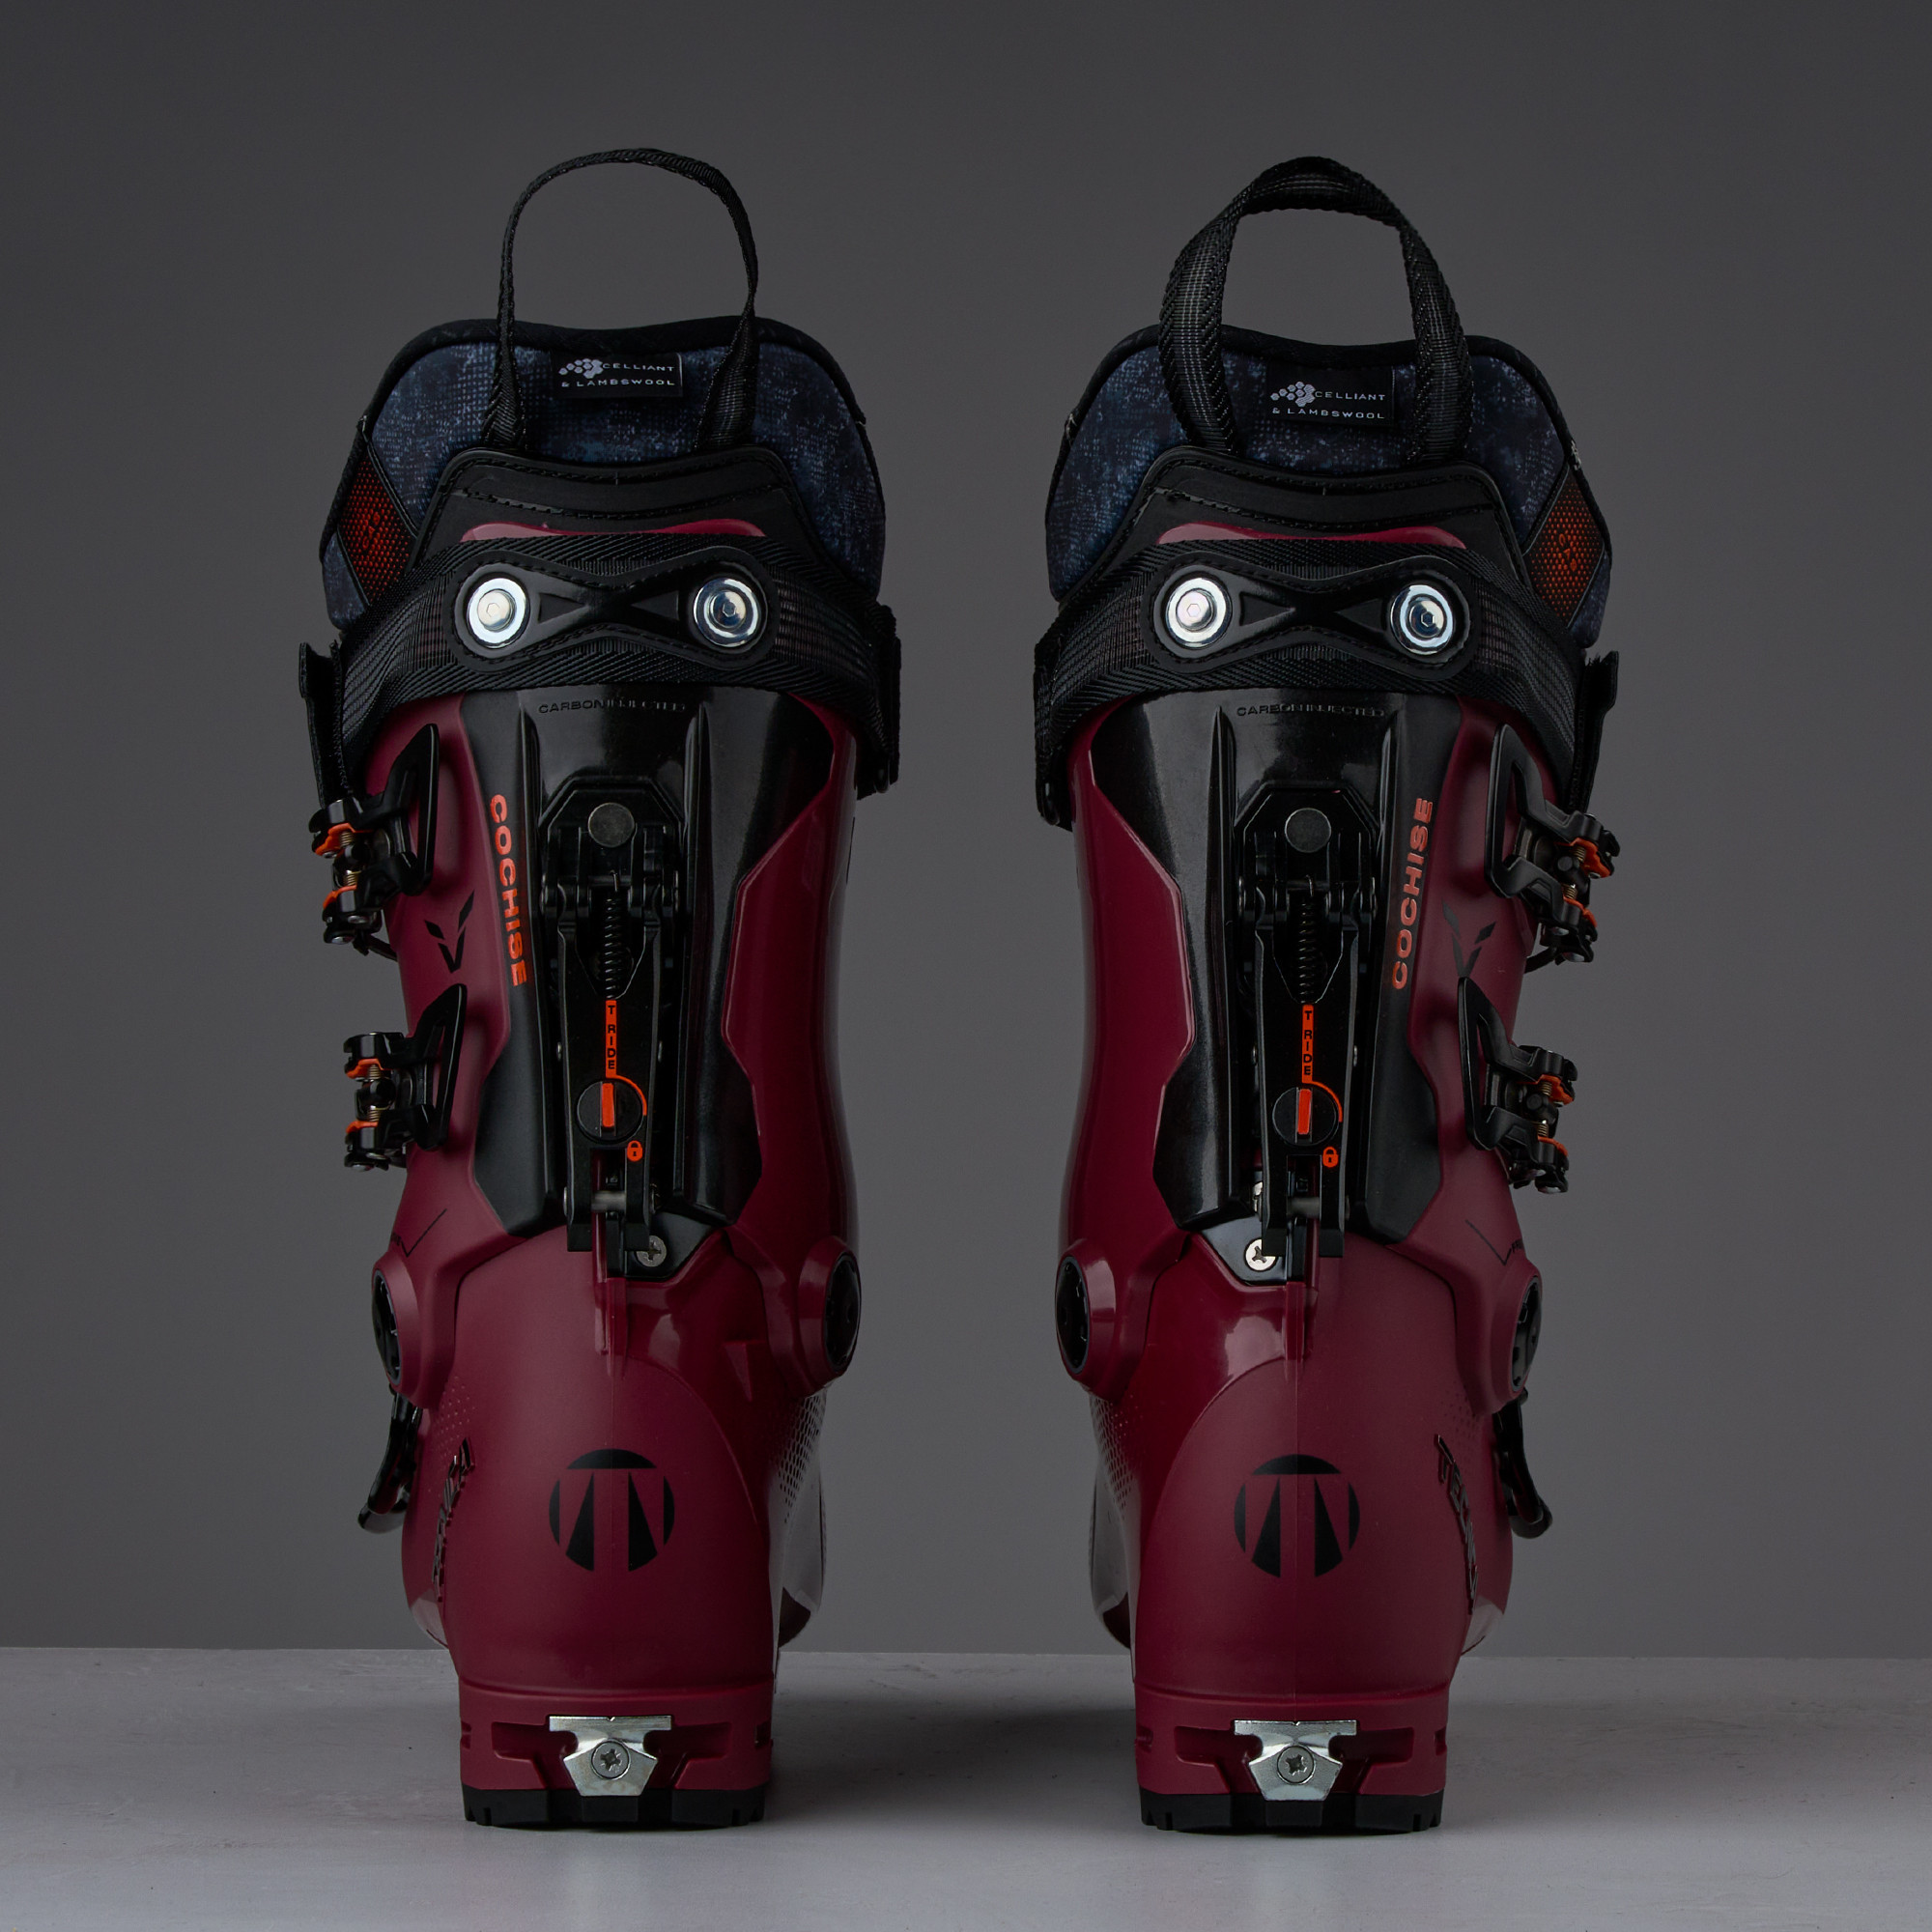 Tecnica Cochise 105 Women's Ski Boots Review: A Touring and Downhill Wonder